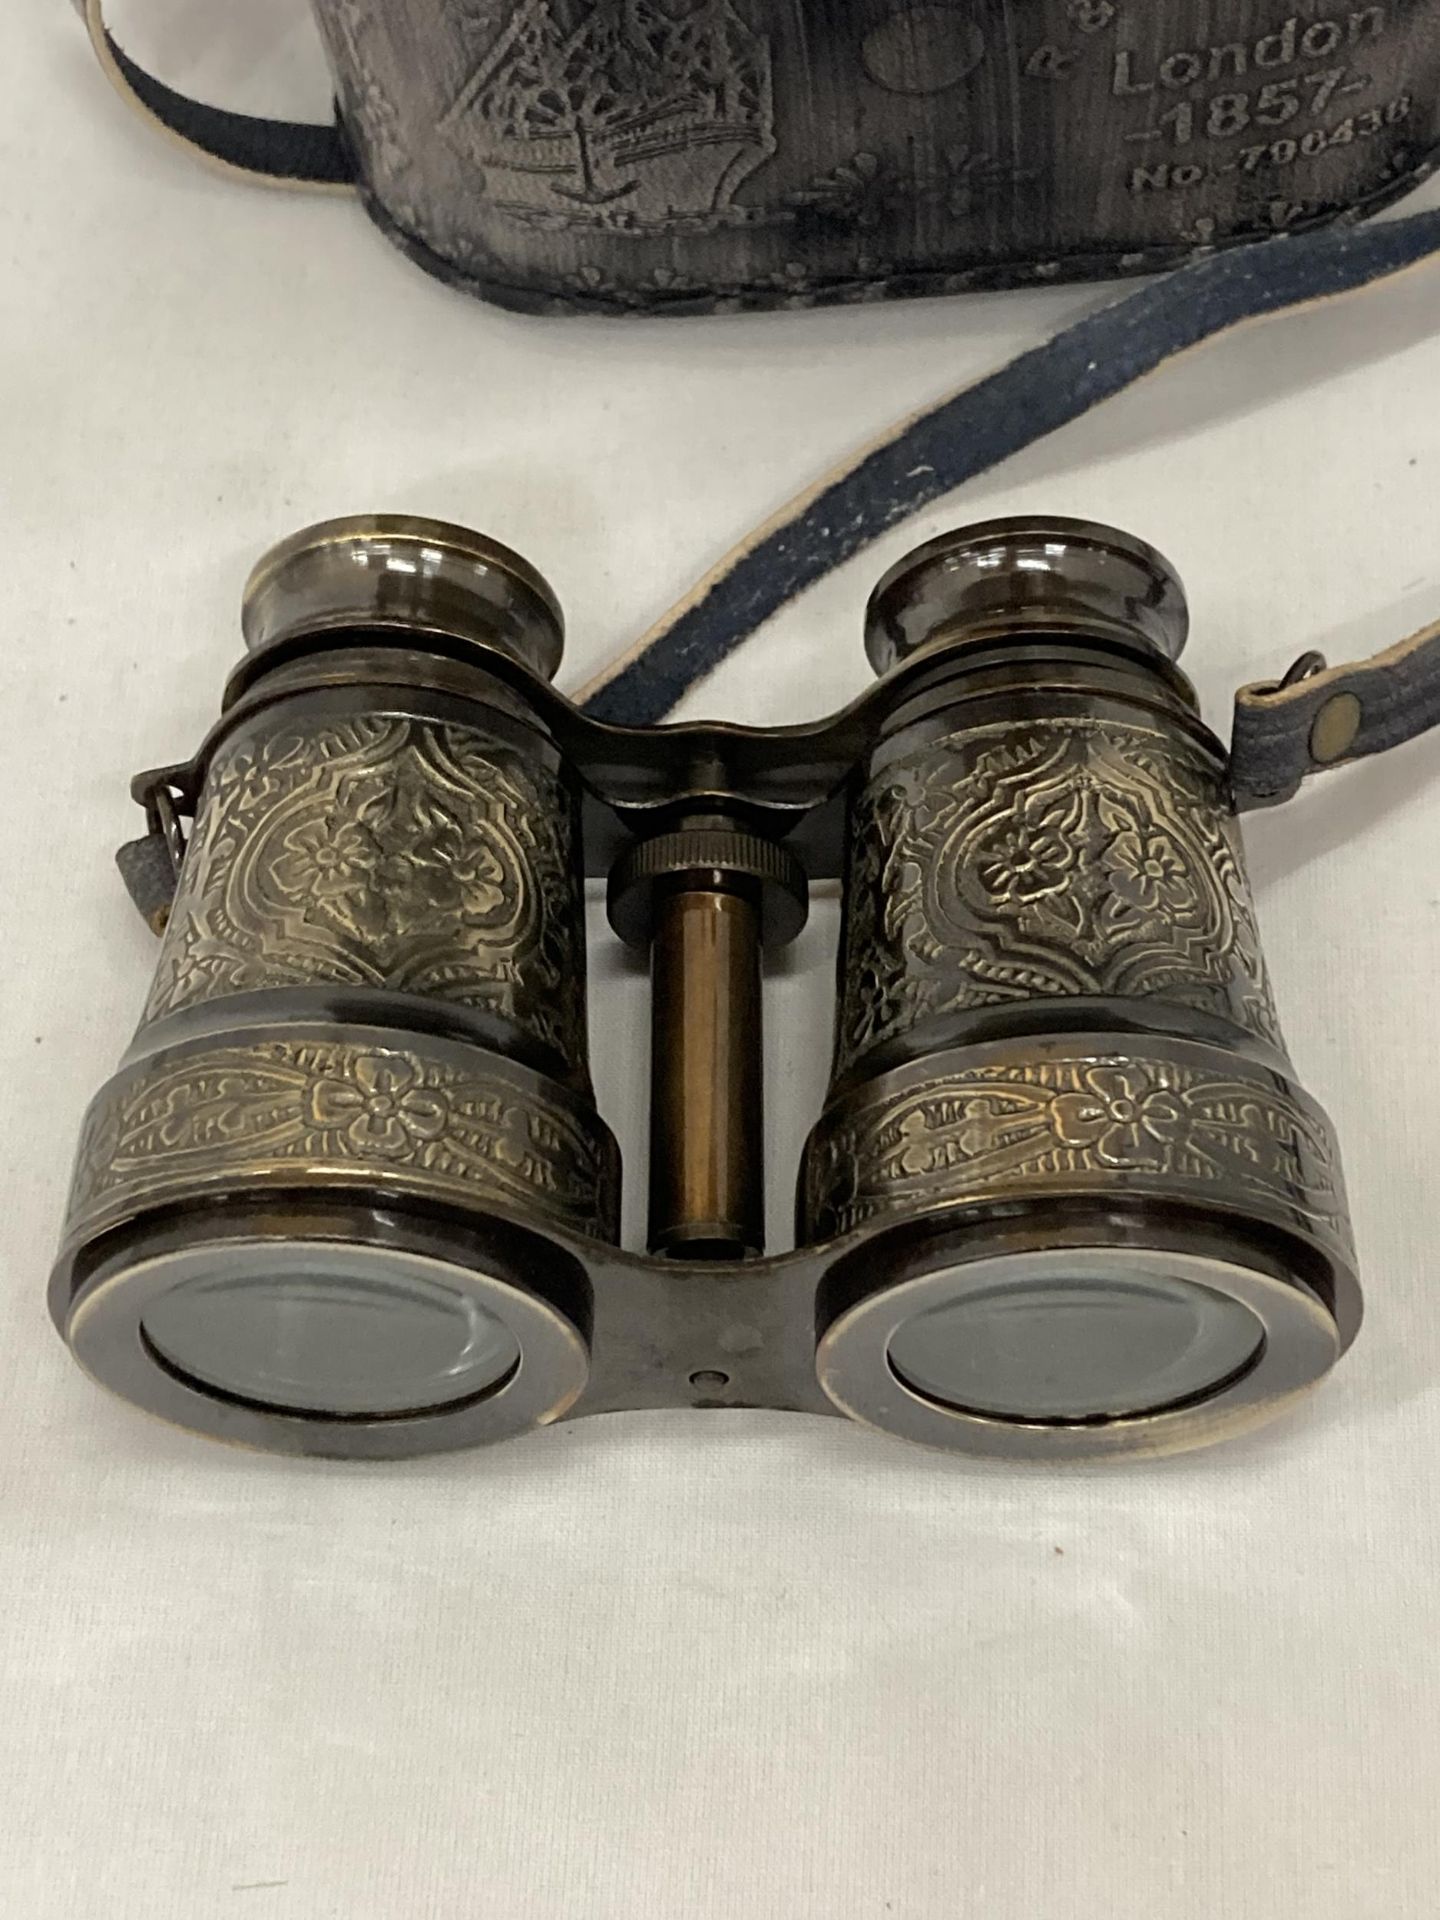 A PAIR OF BRASS BINOCULARS IN A LEATHER CASE - Image 3 of 3